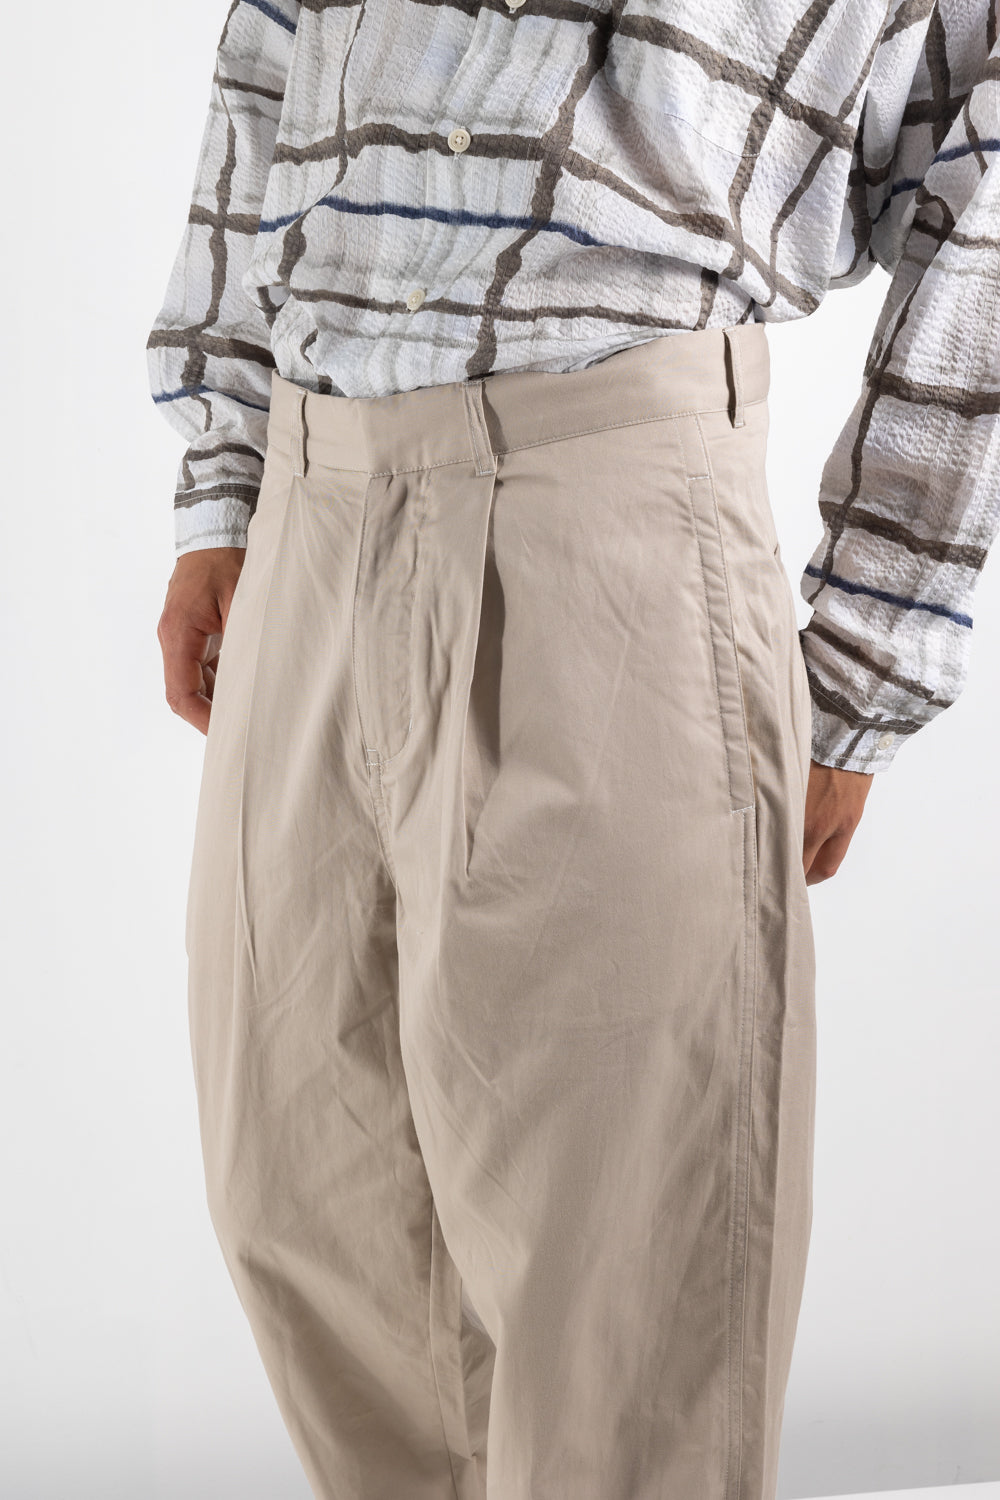 Mens trouser | Garbstore Manager Pant | The Standard Store